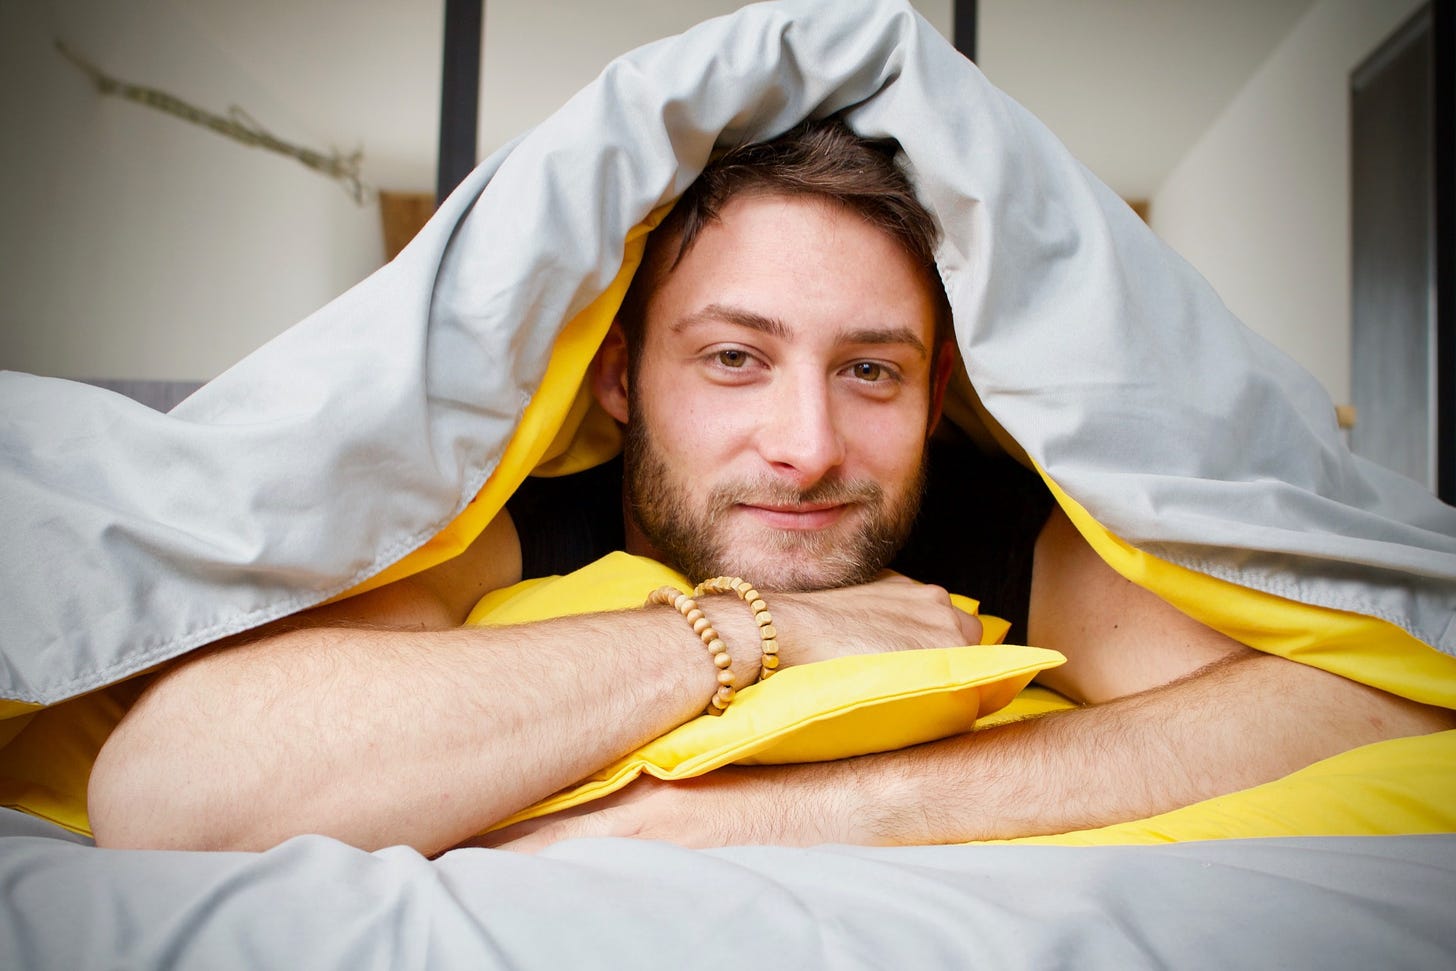 A man lays in bed with his hands folded under his chin, and his blanket over his head. He smiles.